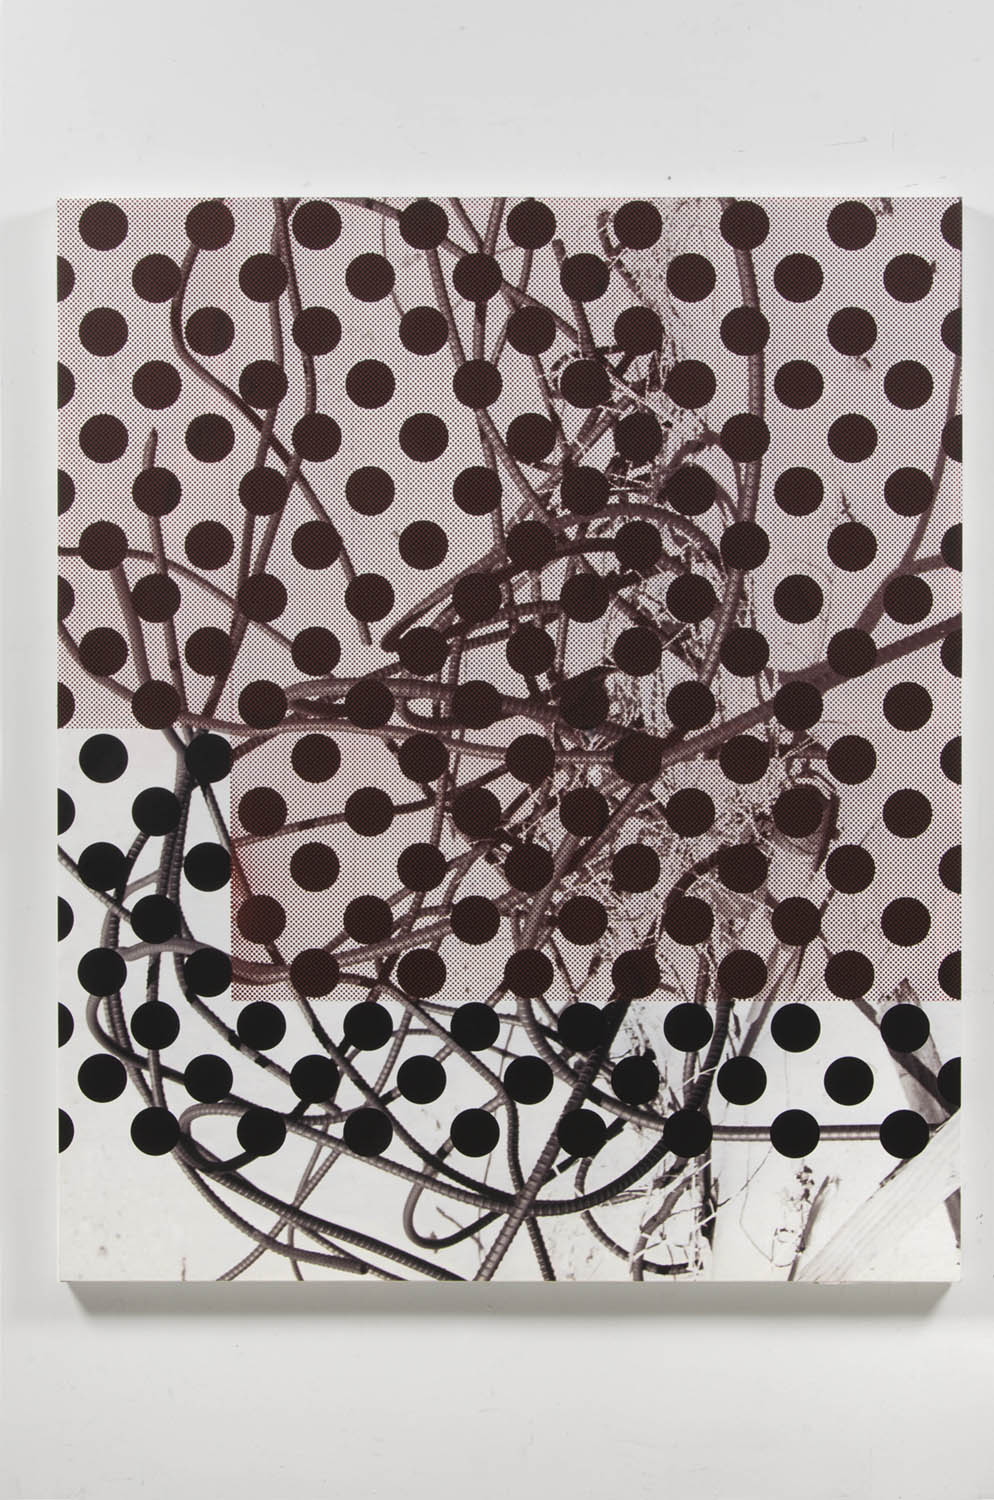  Untitled (rebar 12), 2013  Oil, acrylic and UV cured ink on canvas over panel  65 x 54 inches  165.1 x 137.16 cm       